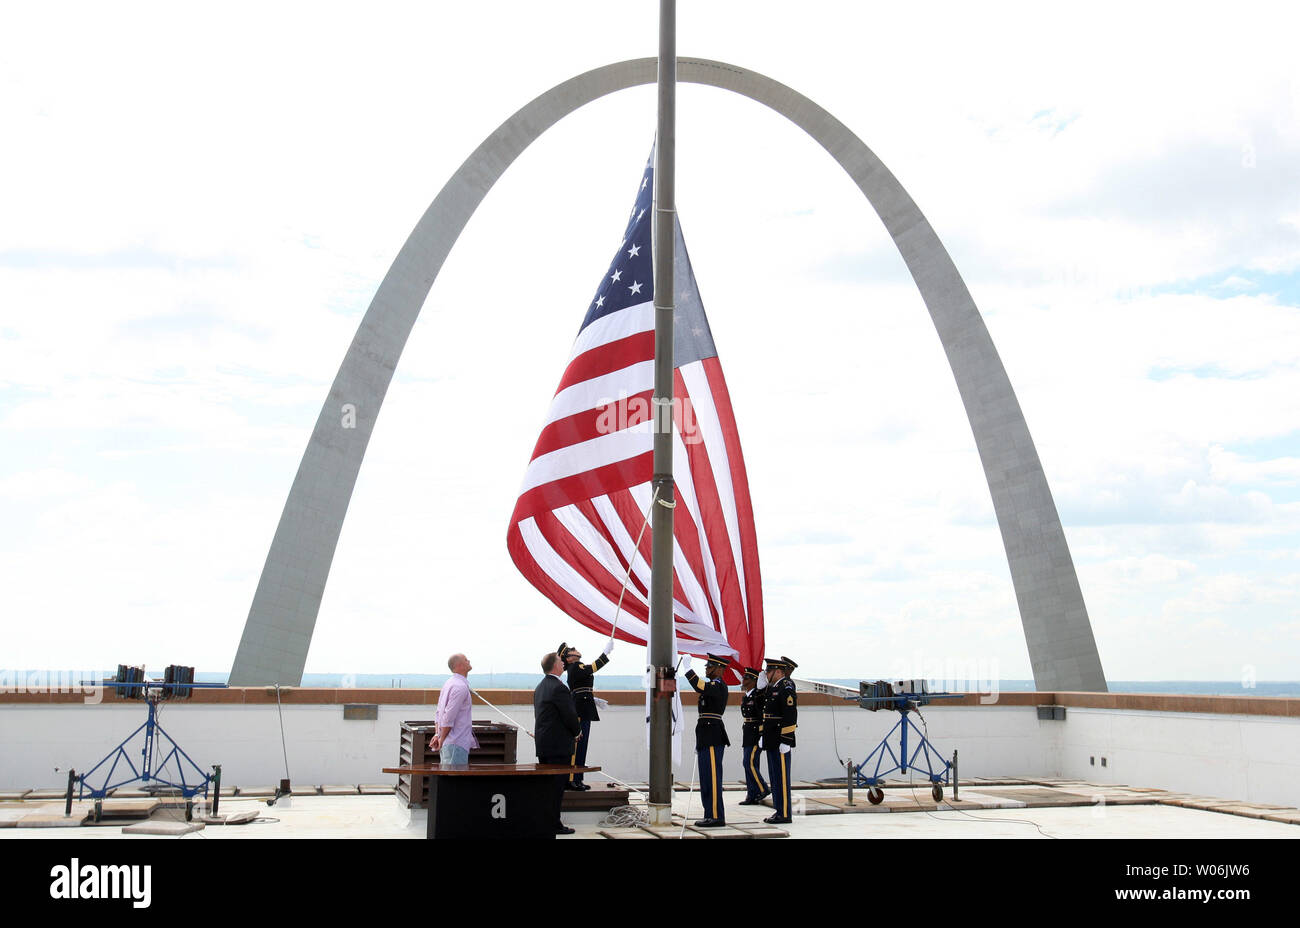 An Army color guard raises an American flag on the roof of the renovated Hyatt Regency next to the Gateway Arch in St. Louis on July 1, 2009. The $63 million renovation on the 910-room hotel is completed in time to be the host hotel for the 2009 All Star Game on July 14. (UPI Photo/Bill Greenblatt) Stock Photo